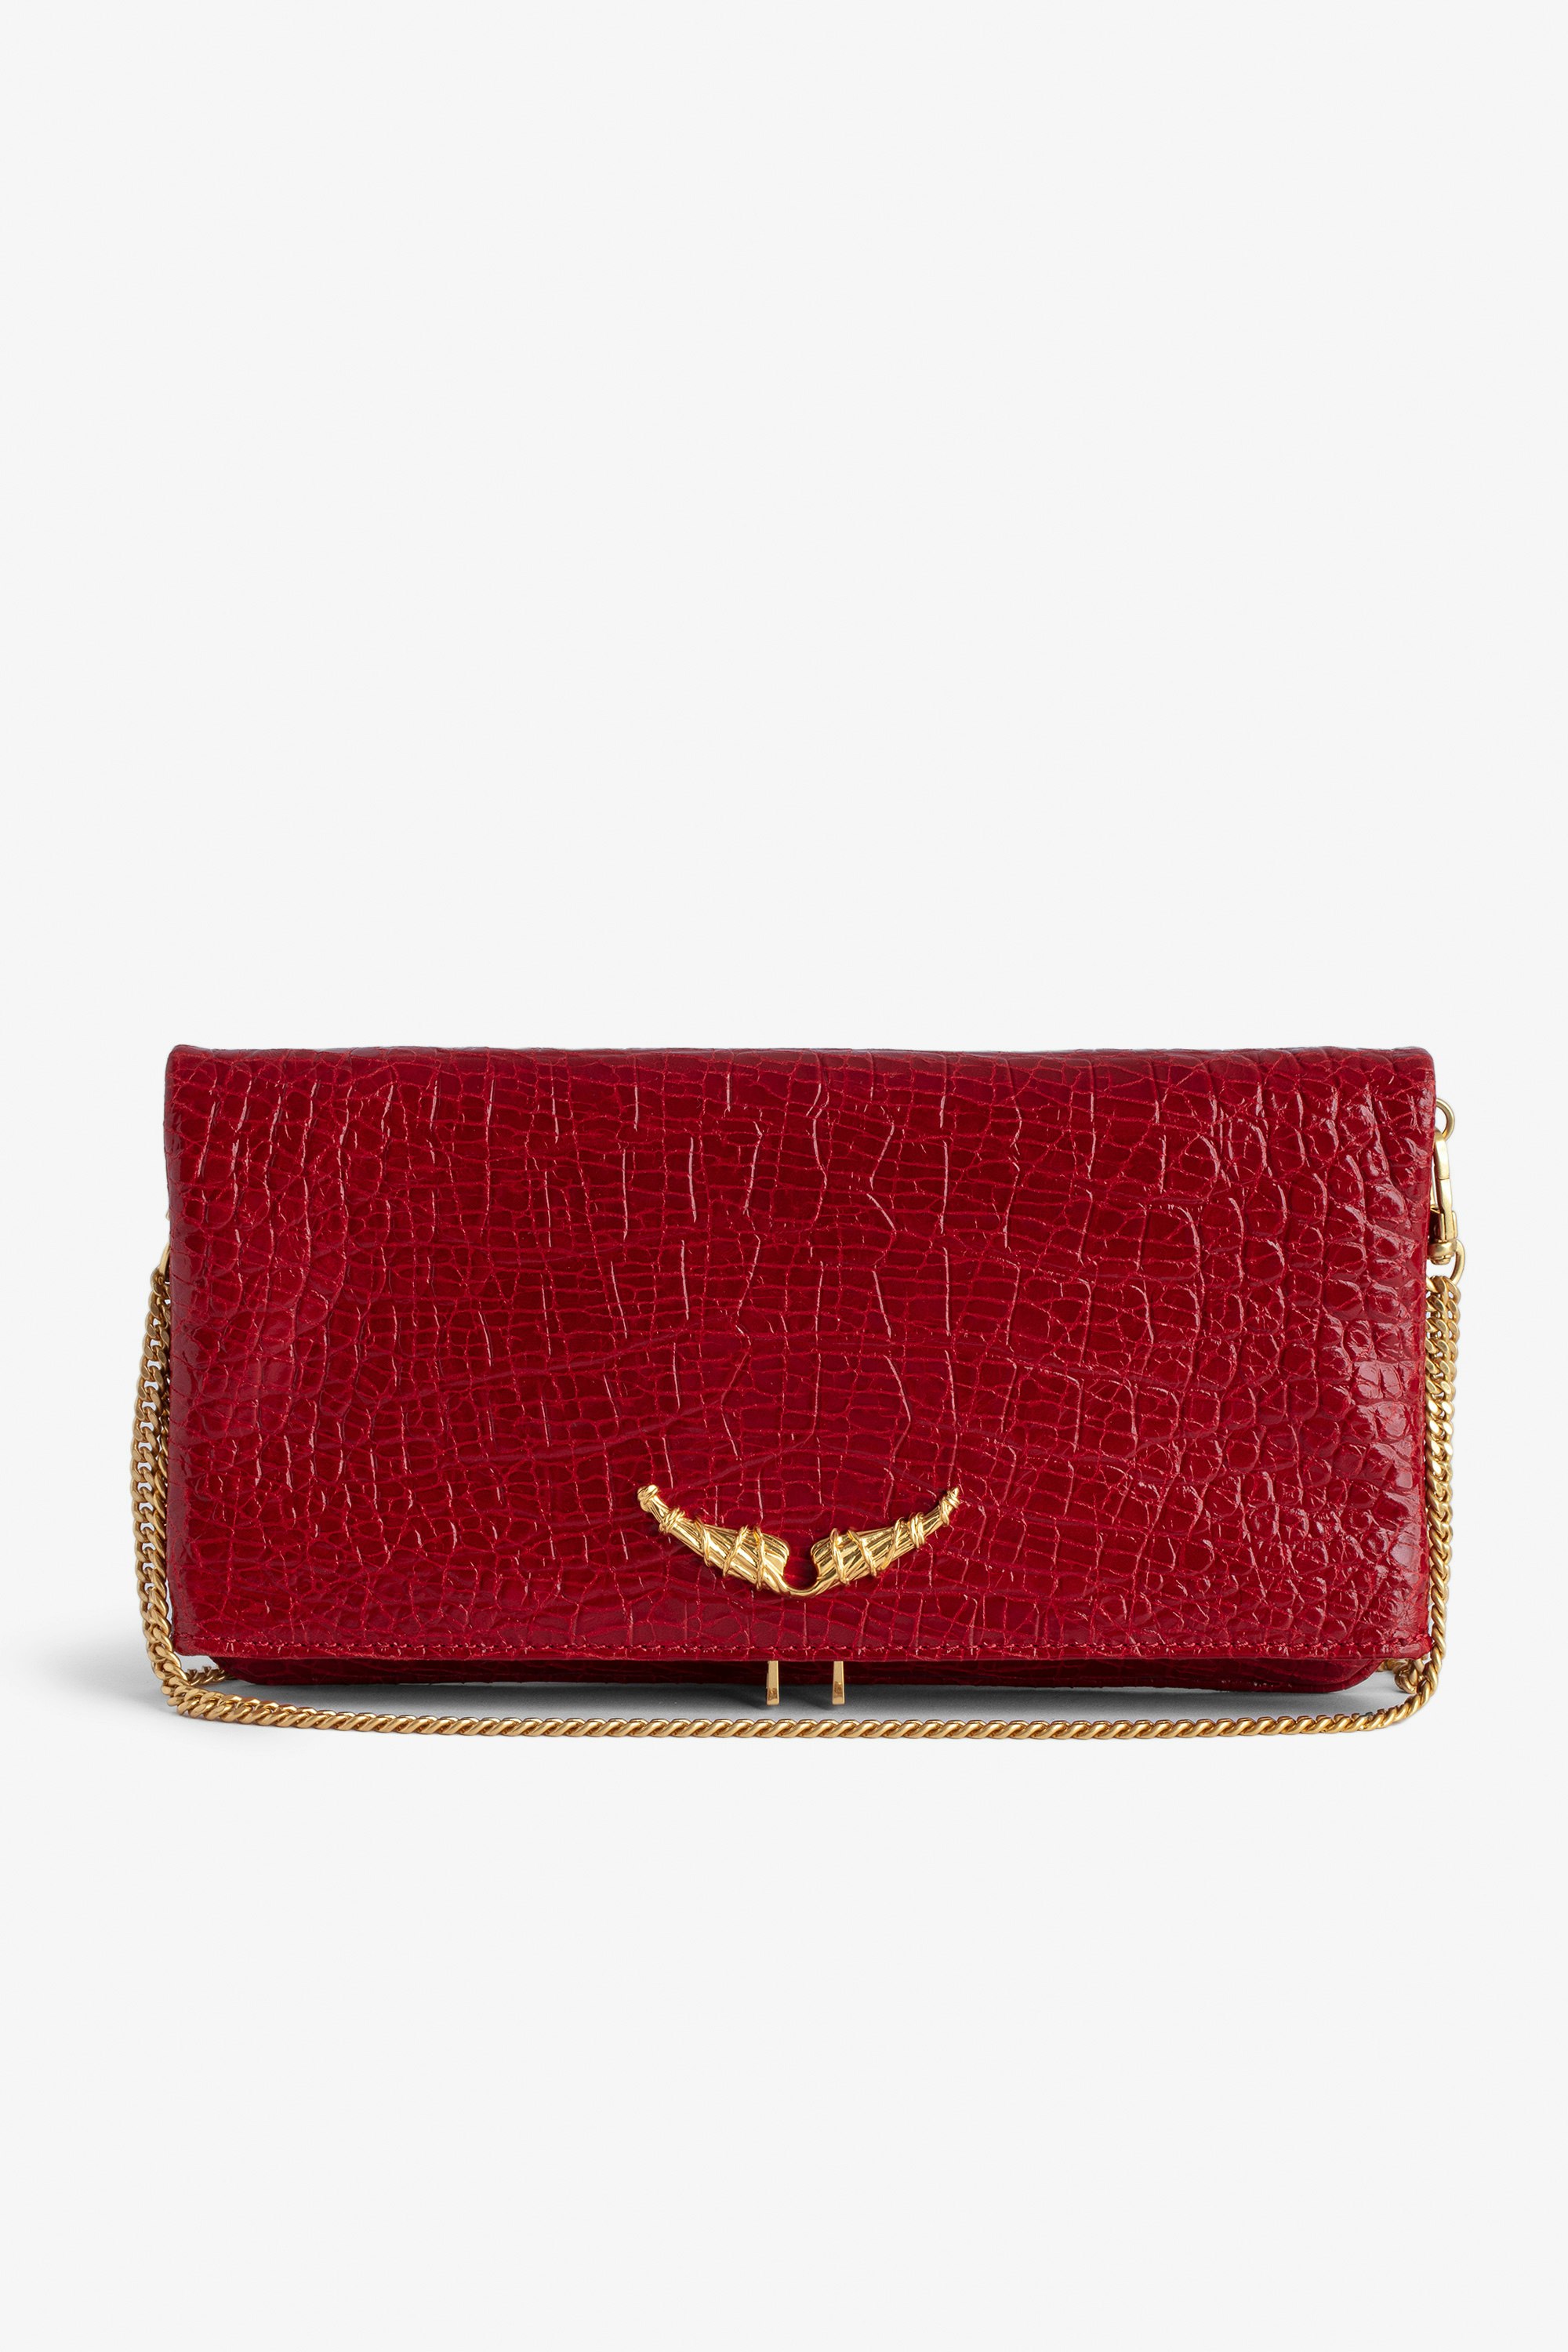  Goossens Rock Embossed Clutch - Rock red croc-embossed leather clutch with gold-tone metal chain.